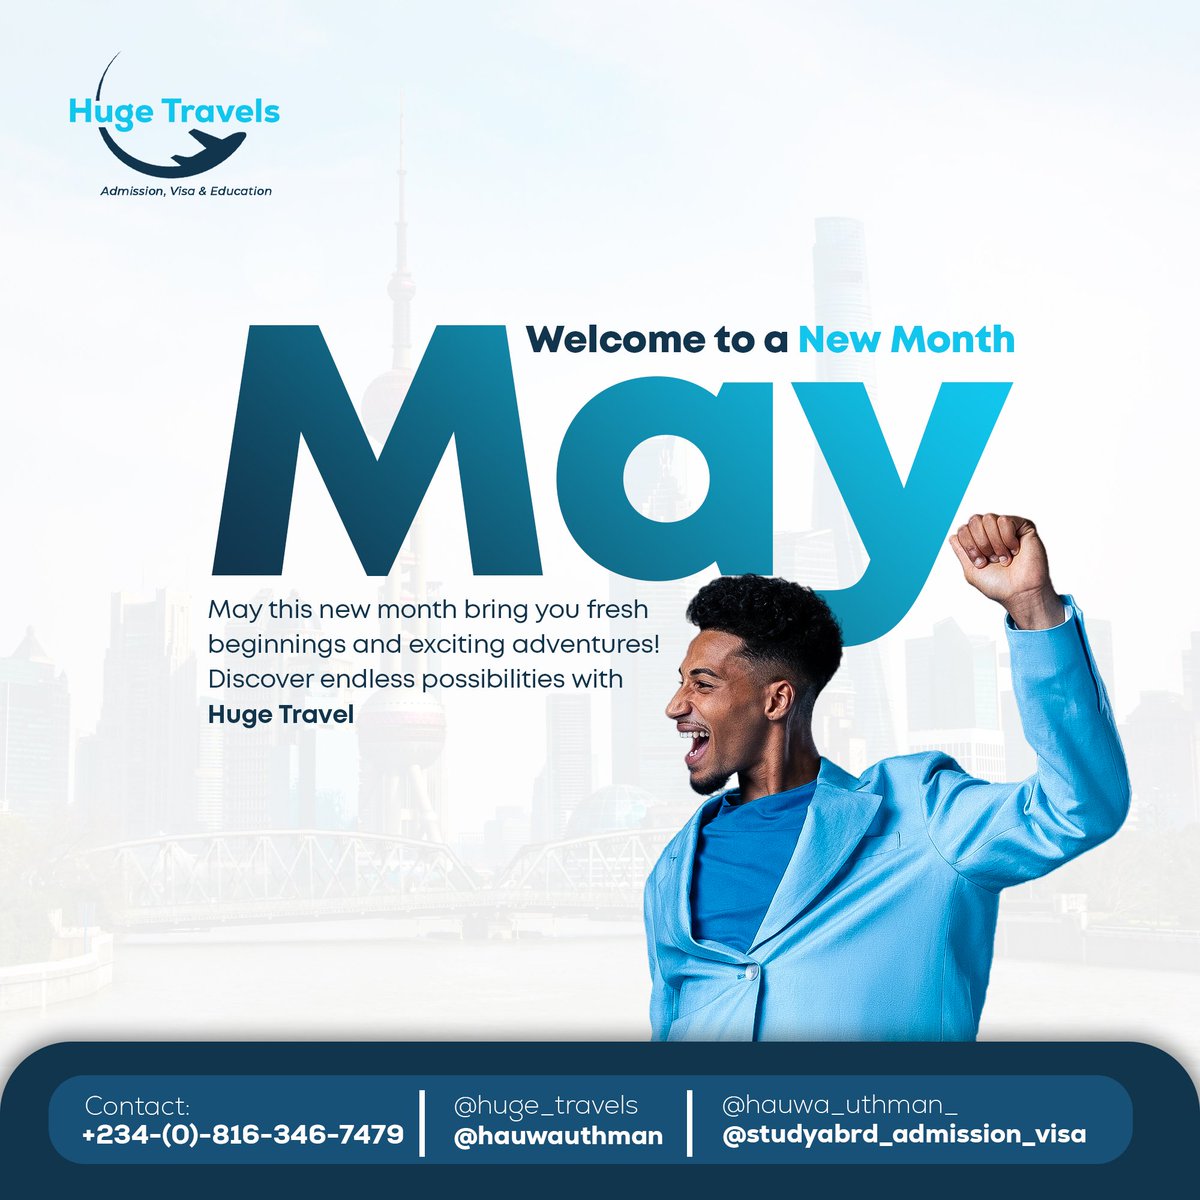 Happy New month from us to you

#huge_travels
#educationabroad
#travelagency